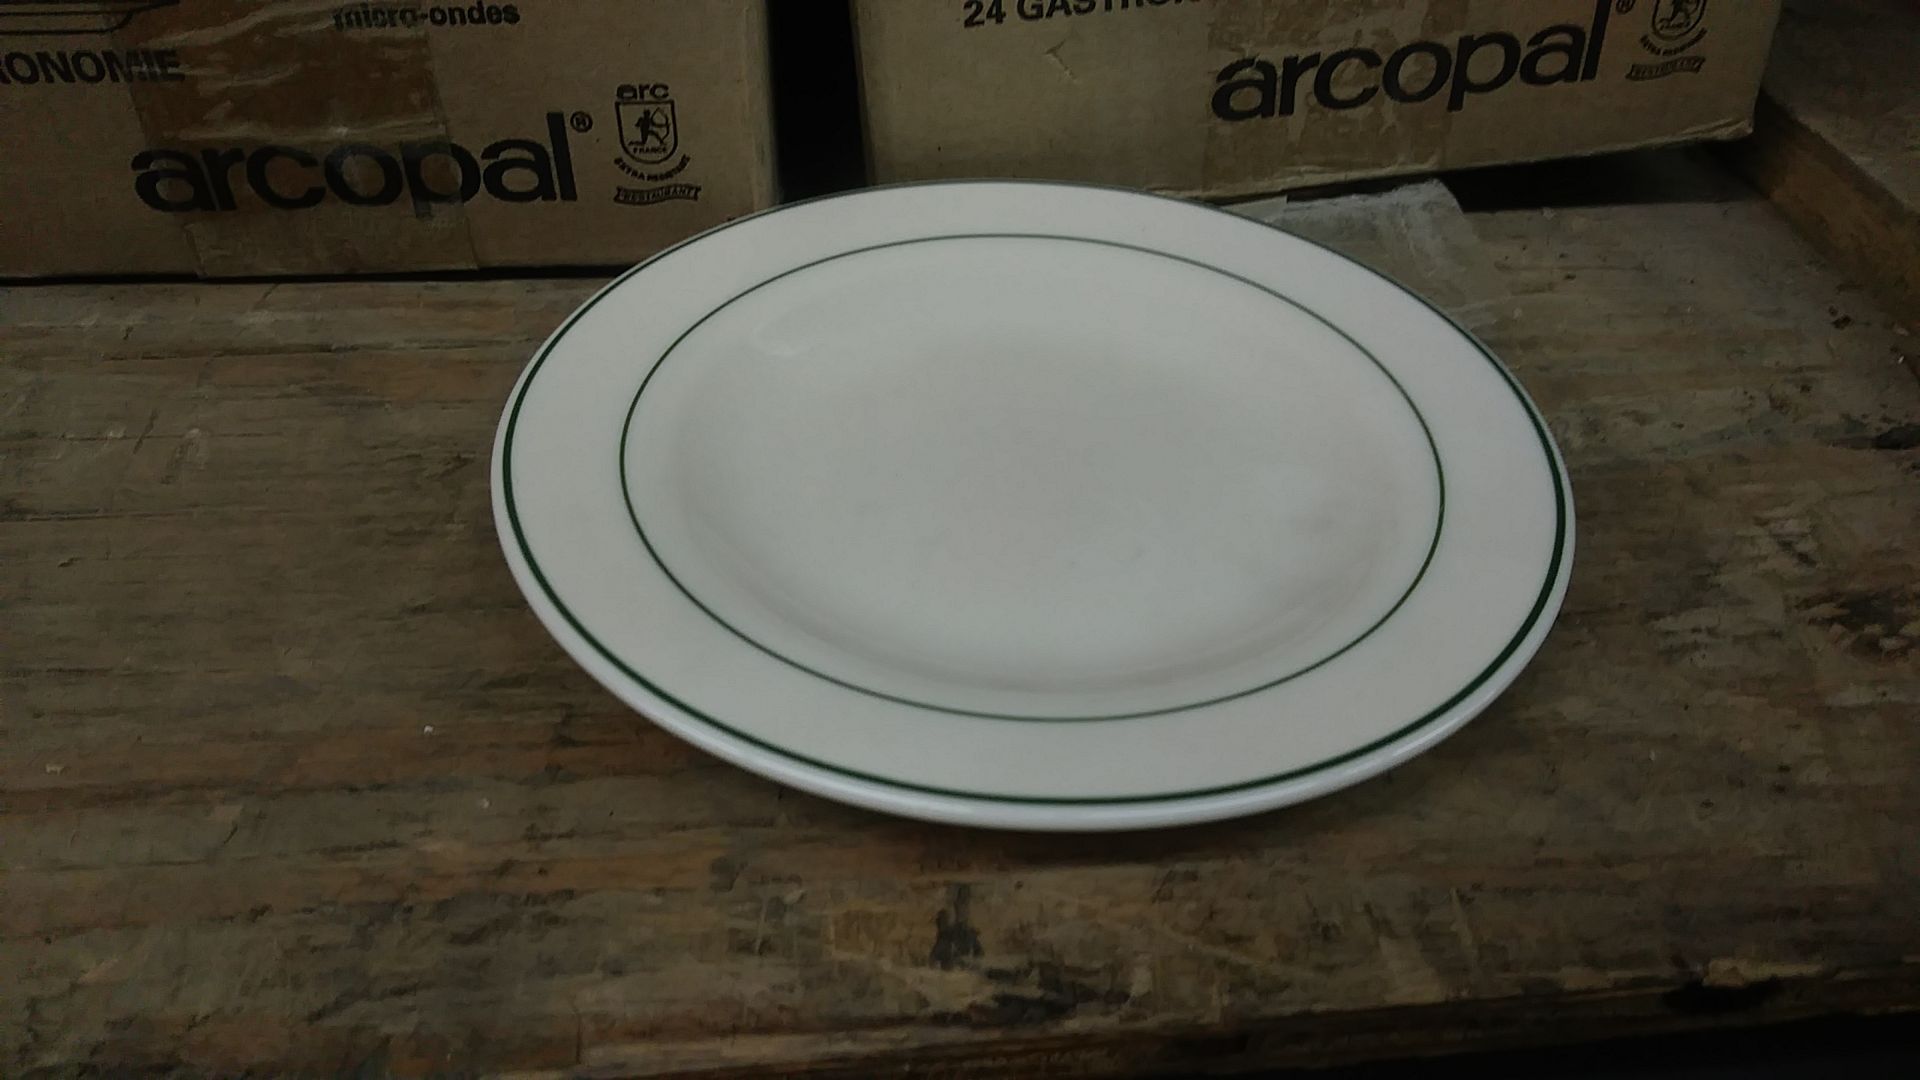 NEW 6" PLATE ARCOPAL (INCLUDES QTY 100)